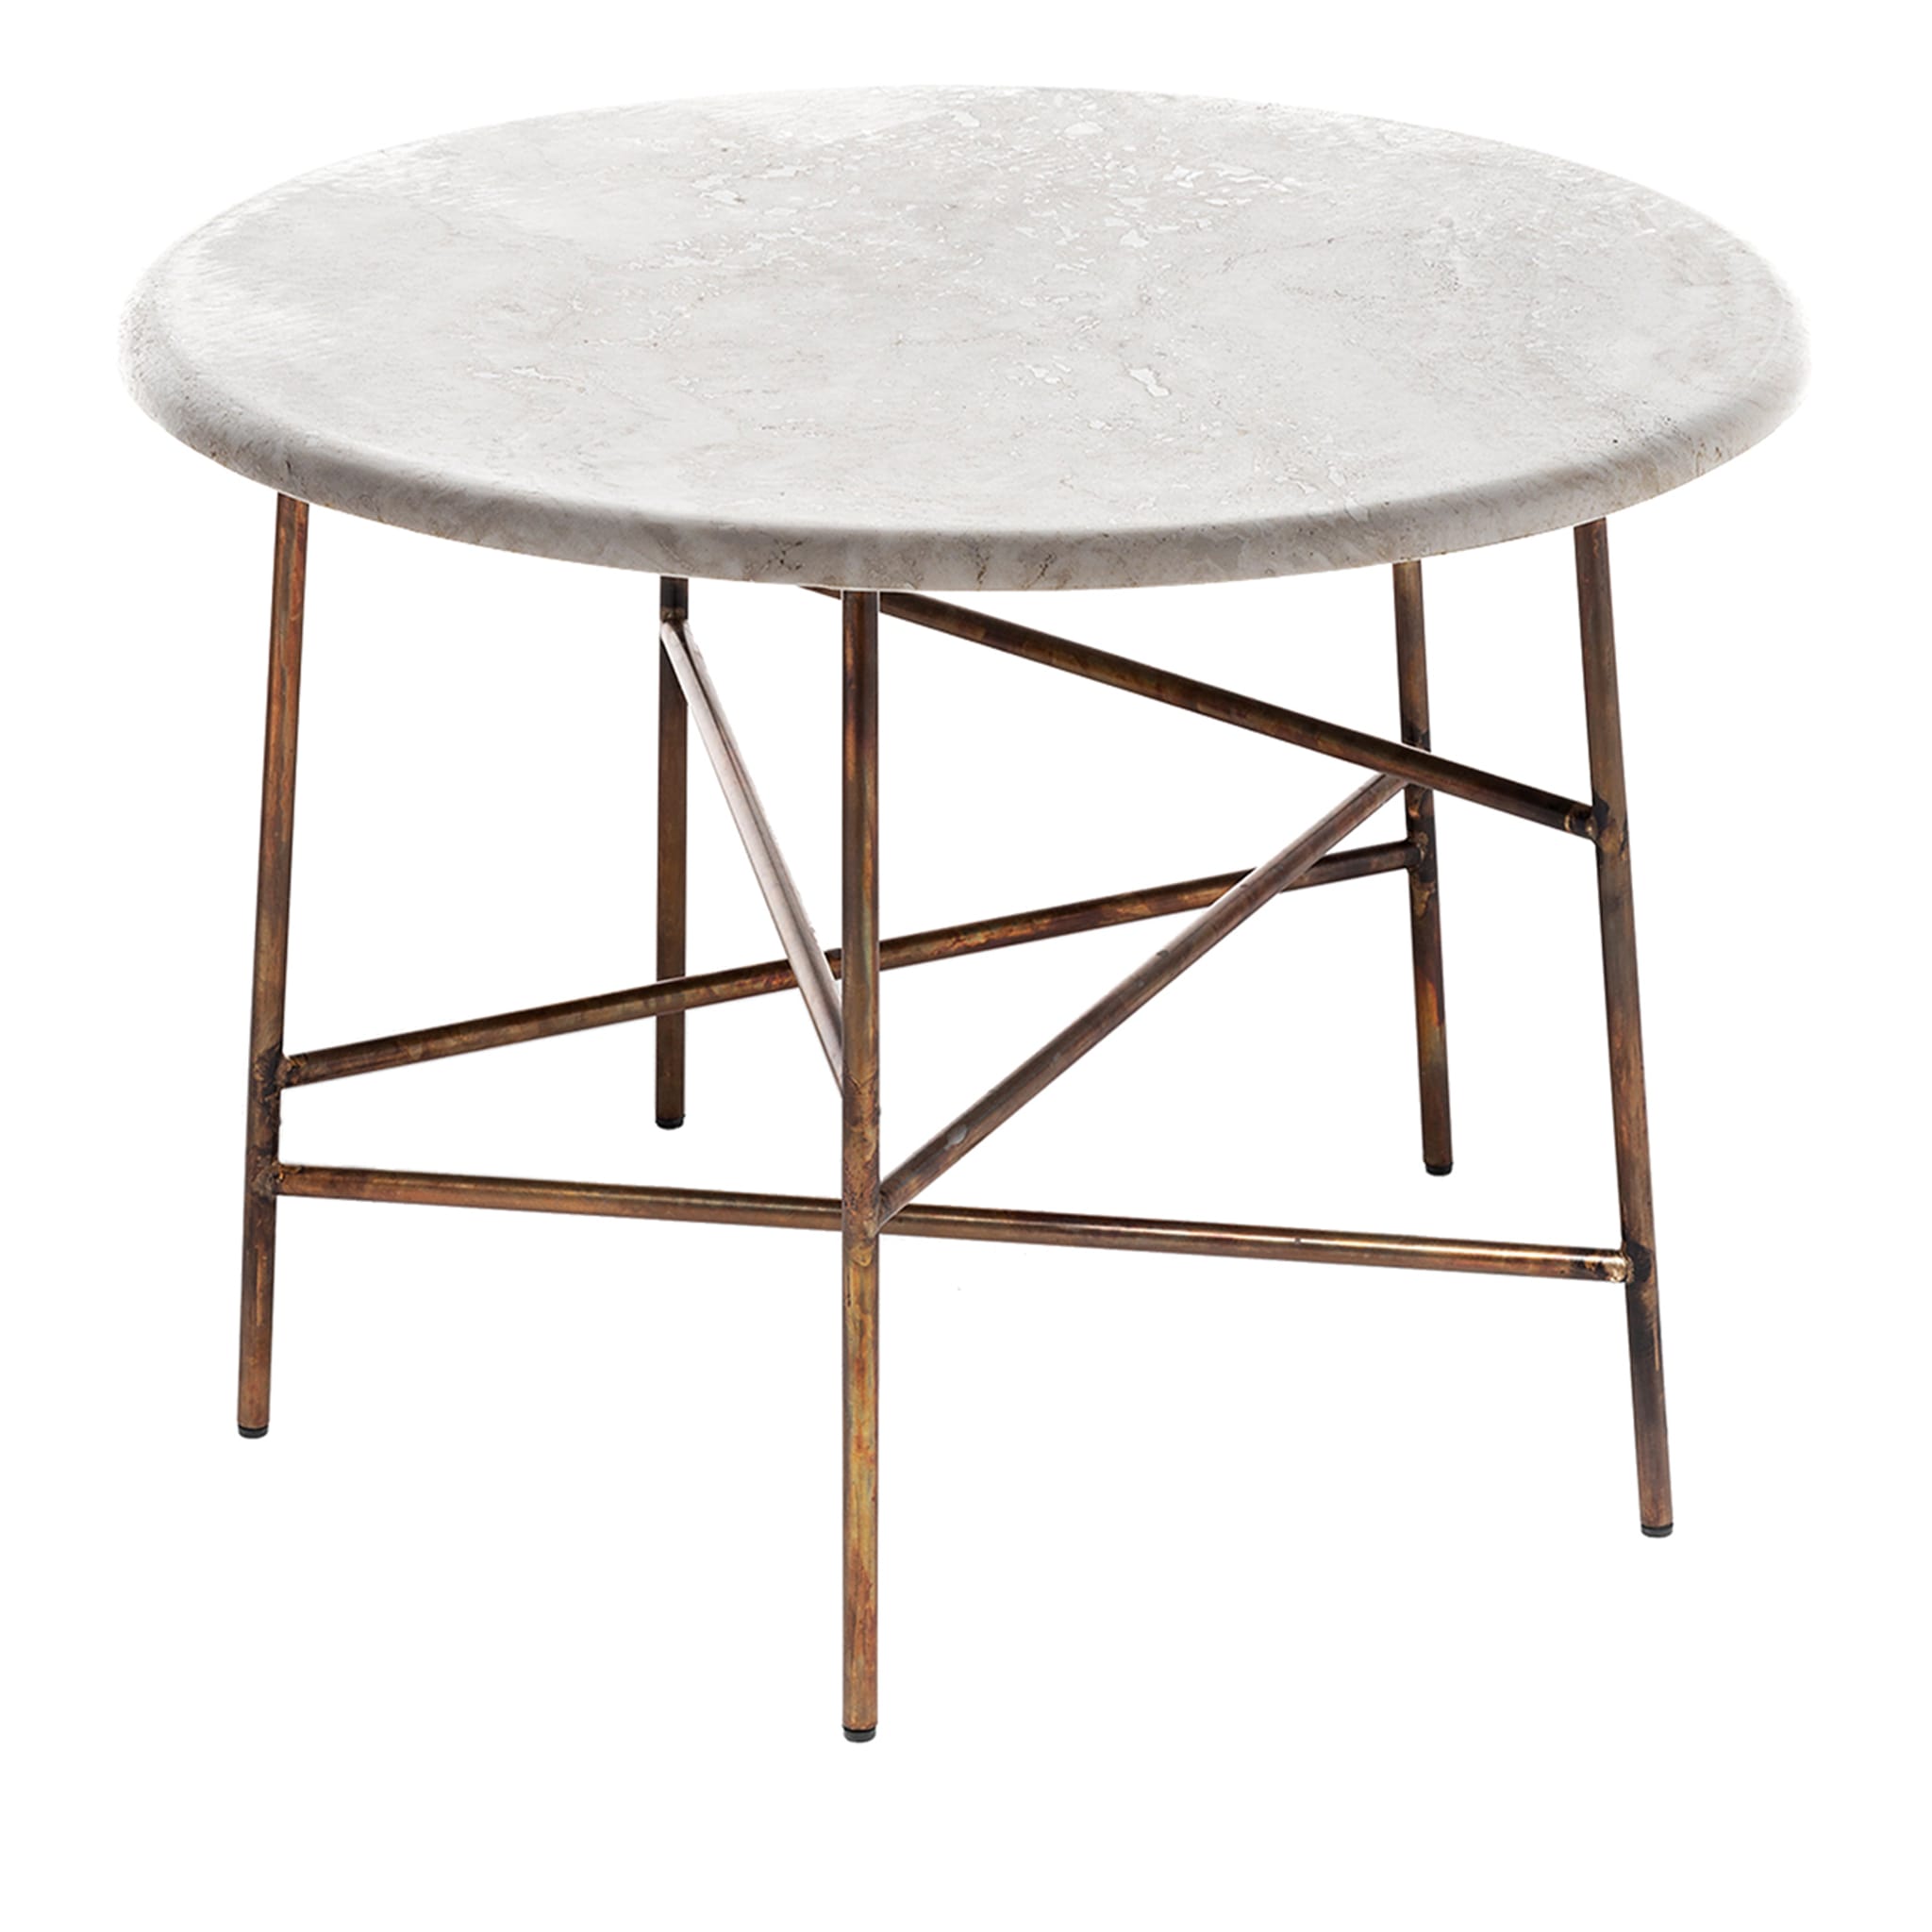 10th Star White Coffee Table 60 by Massimo Castagna - Main view